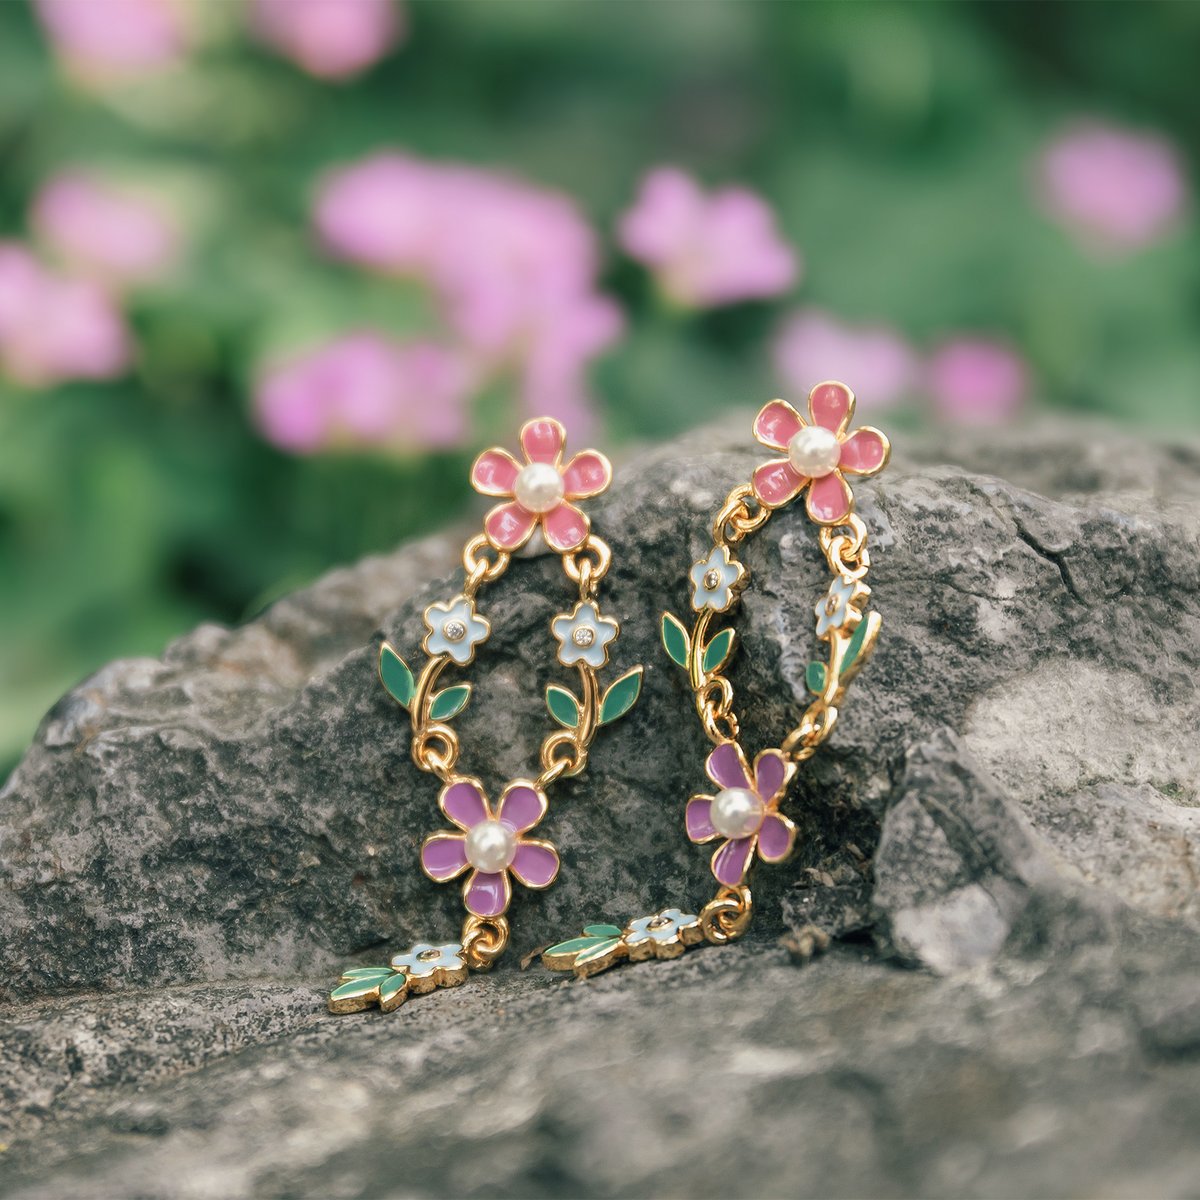 💐Featuring a shimmering gold setting and a carefully detailed blossom silhouette, Blossom Earrings truly embody effortless luxury and sophistication.

Shop in the link🔗selenichast.com/products/bloss…
#selenichast #selenichastjewel #blossoms #jewelry #flowerearrings #earringsstyle